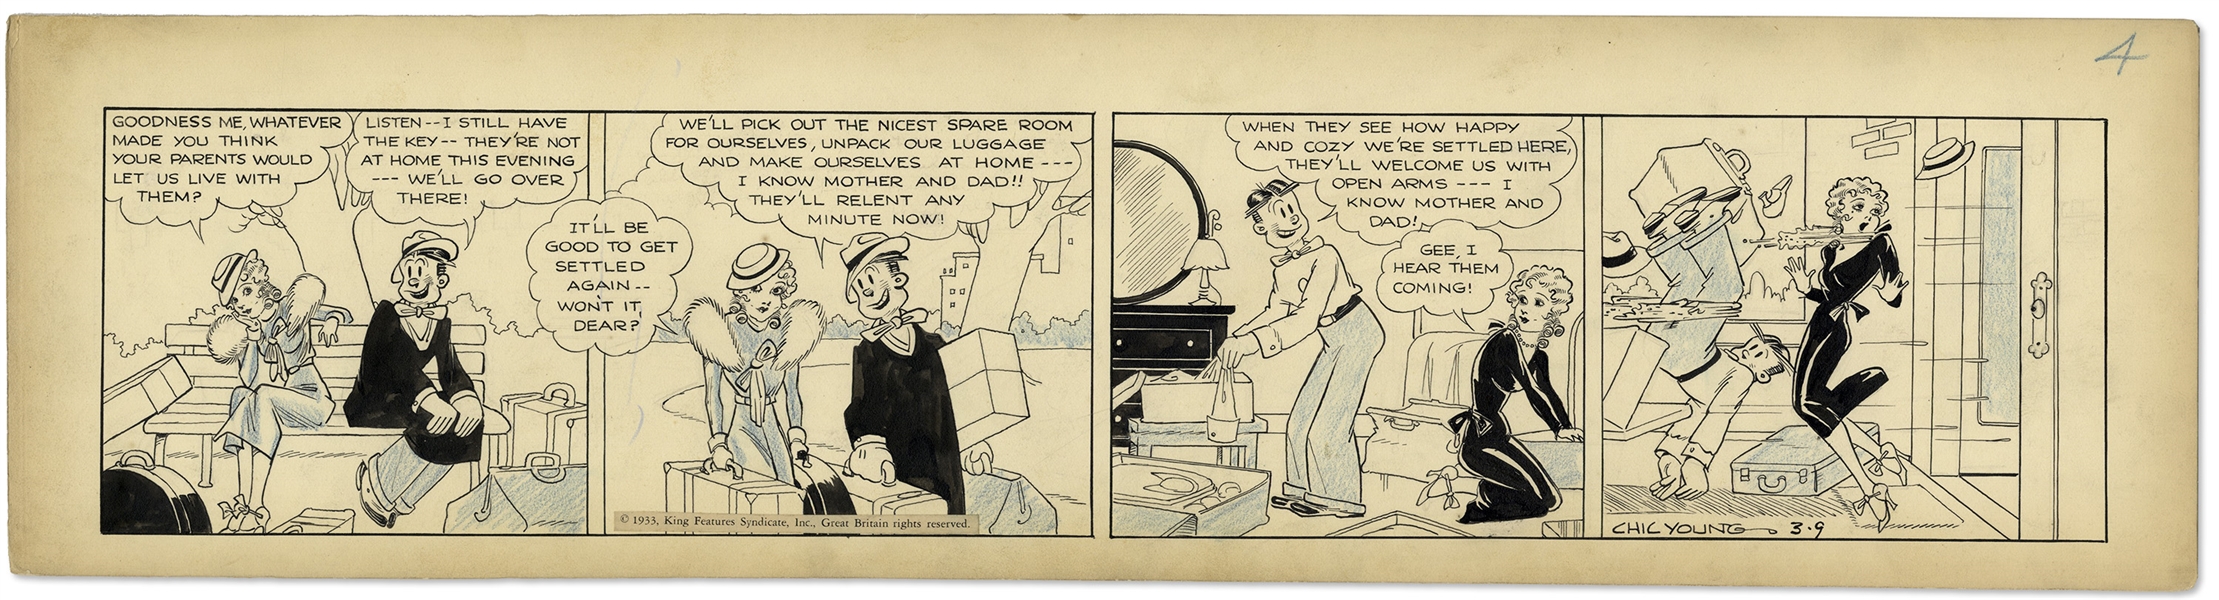 Chic Young Hand-Drawn ''Blondie'' Comic Strip From 1933 Titled ''One Large Happy Family''